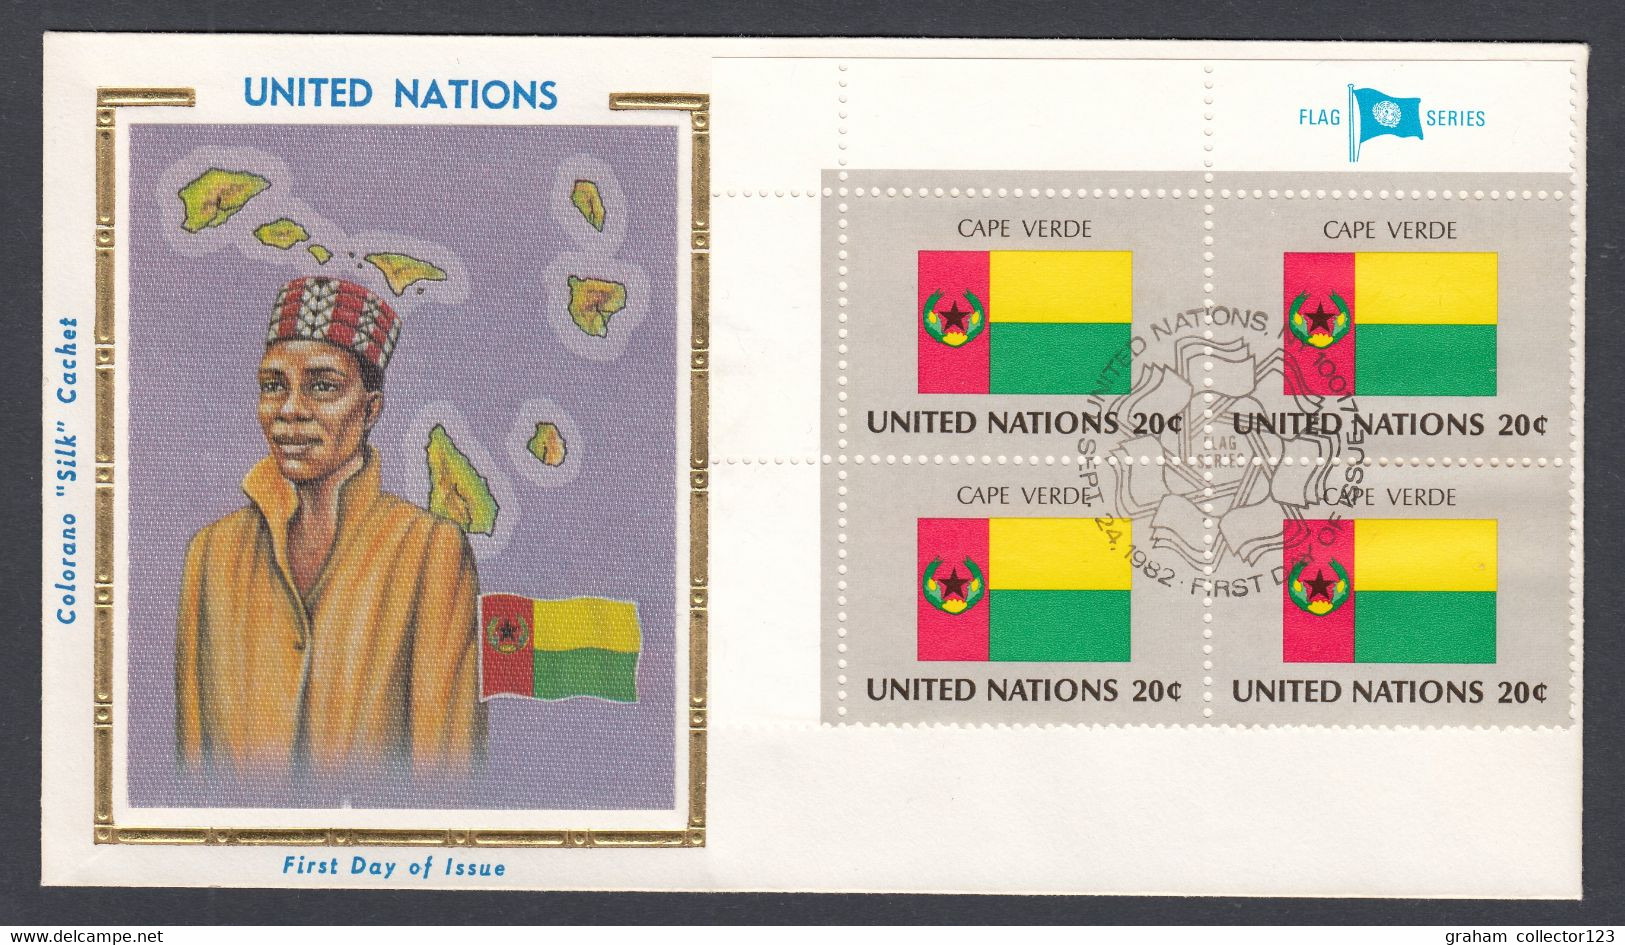 UN United Nations Flag Series Block Of Stamps On First Day Cover Cape Verde Flag 1982 - Briefe U. Dokumente